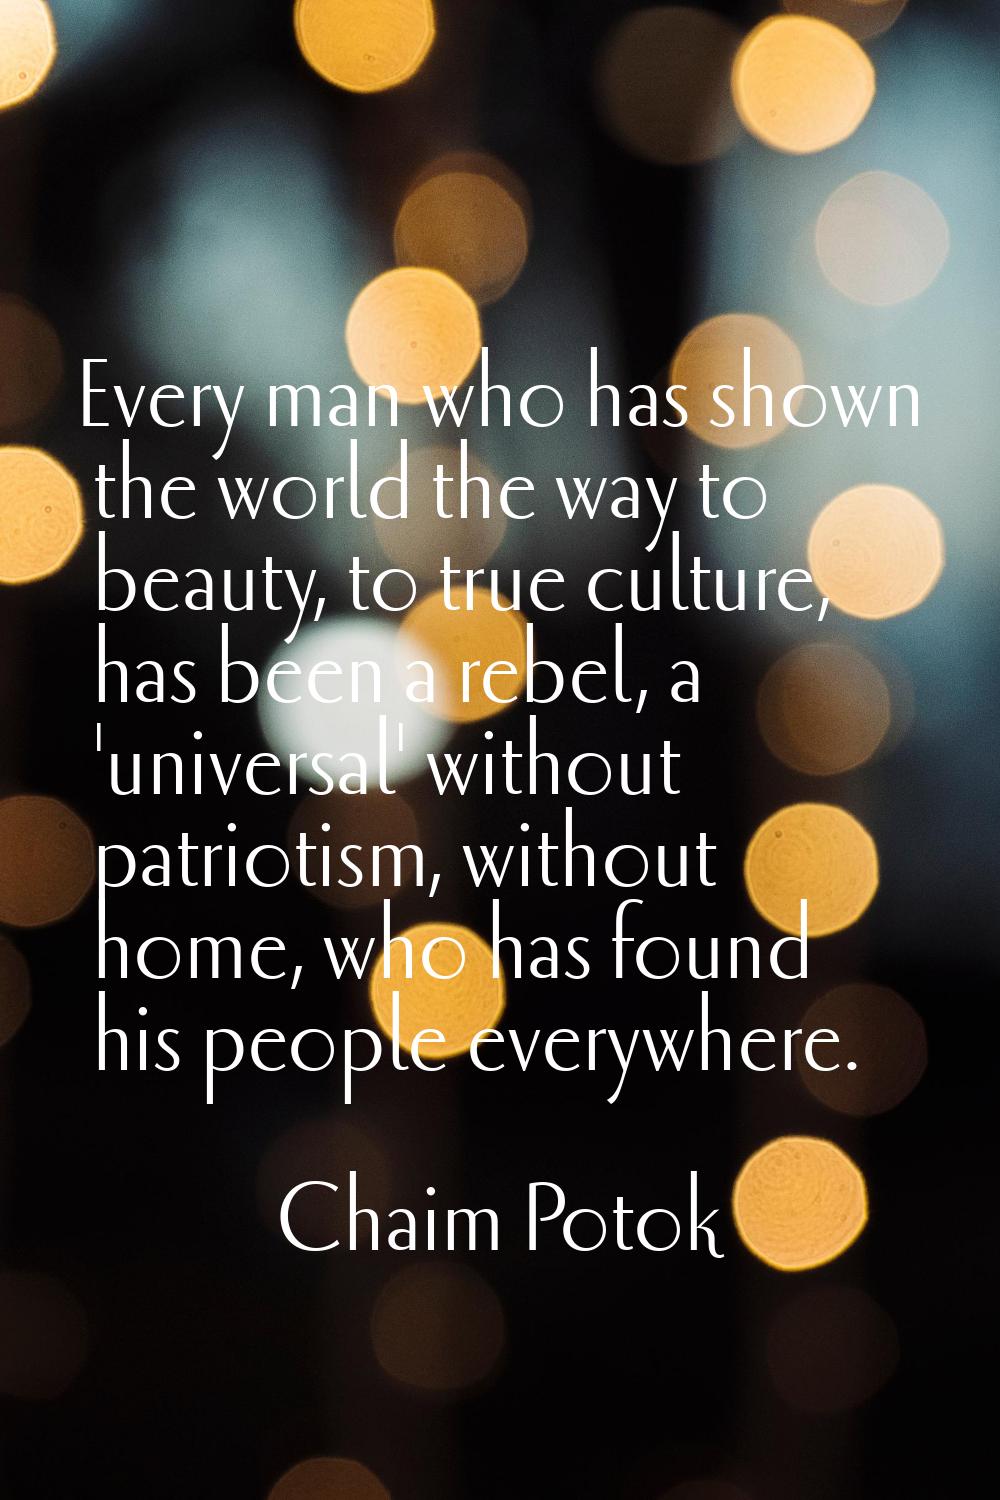 Every man who has shown the world the way to beauty, to true culture, has been a rebel, a 'universa